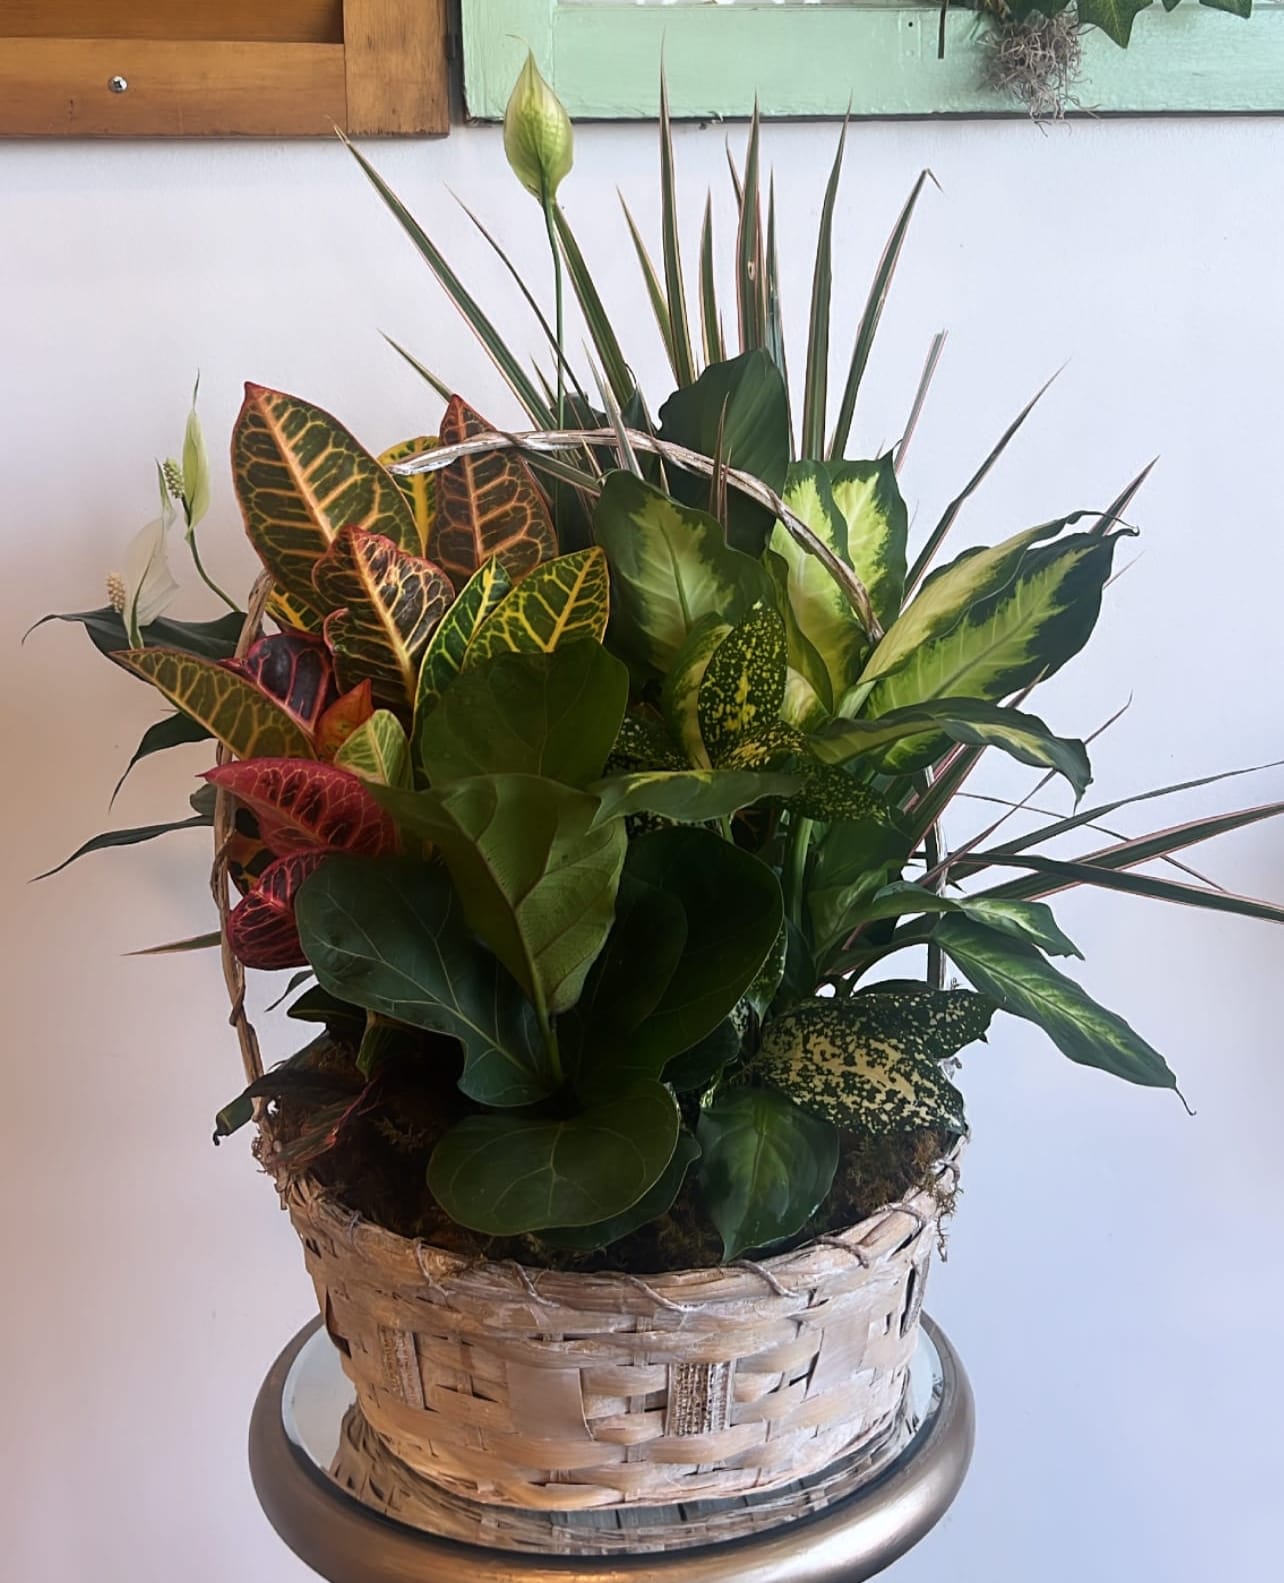 Dish Garden In Basket : Code:4673 - Introducing our exquisite plant and dish garden collection, a perfect alternative to floral arrangements for funeral viewings. These long-lasting plants are a thoughtful and elegant way to express your condolences. 